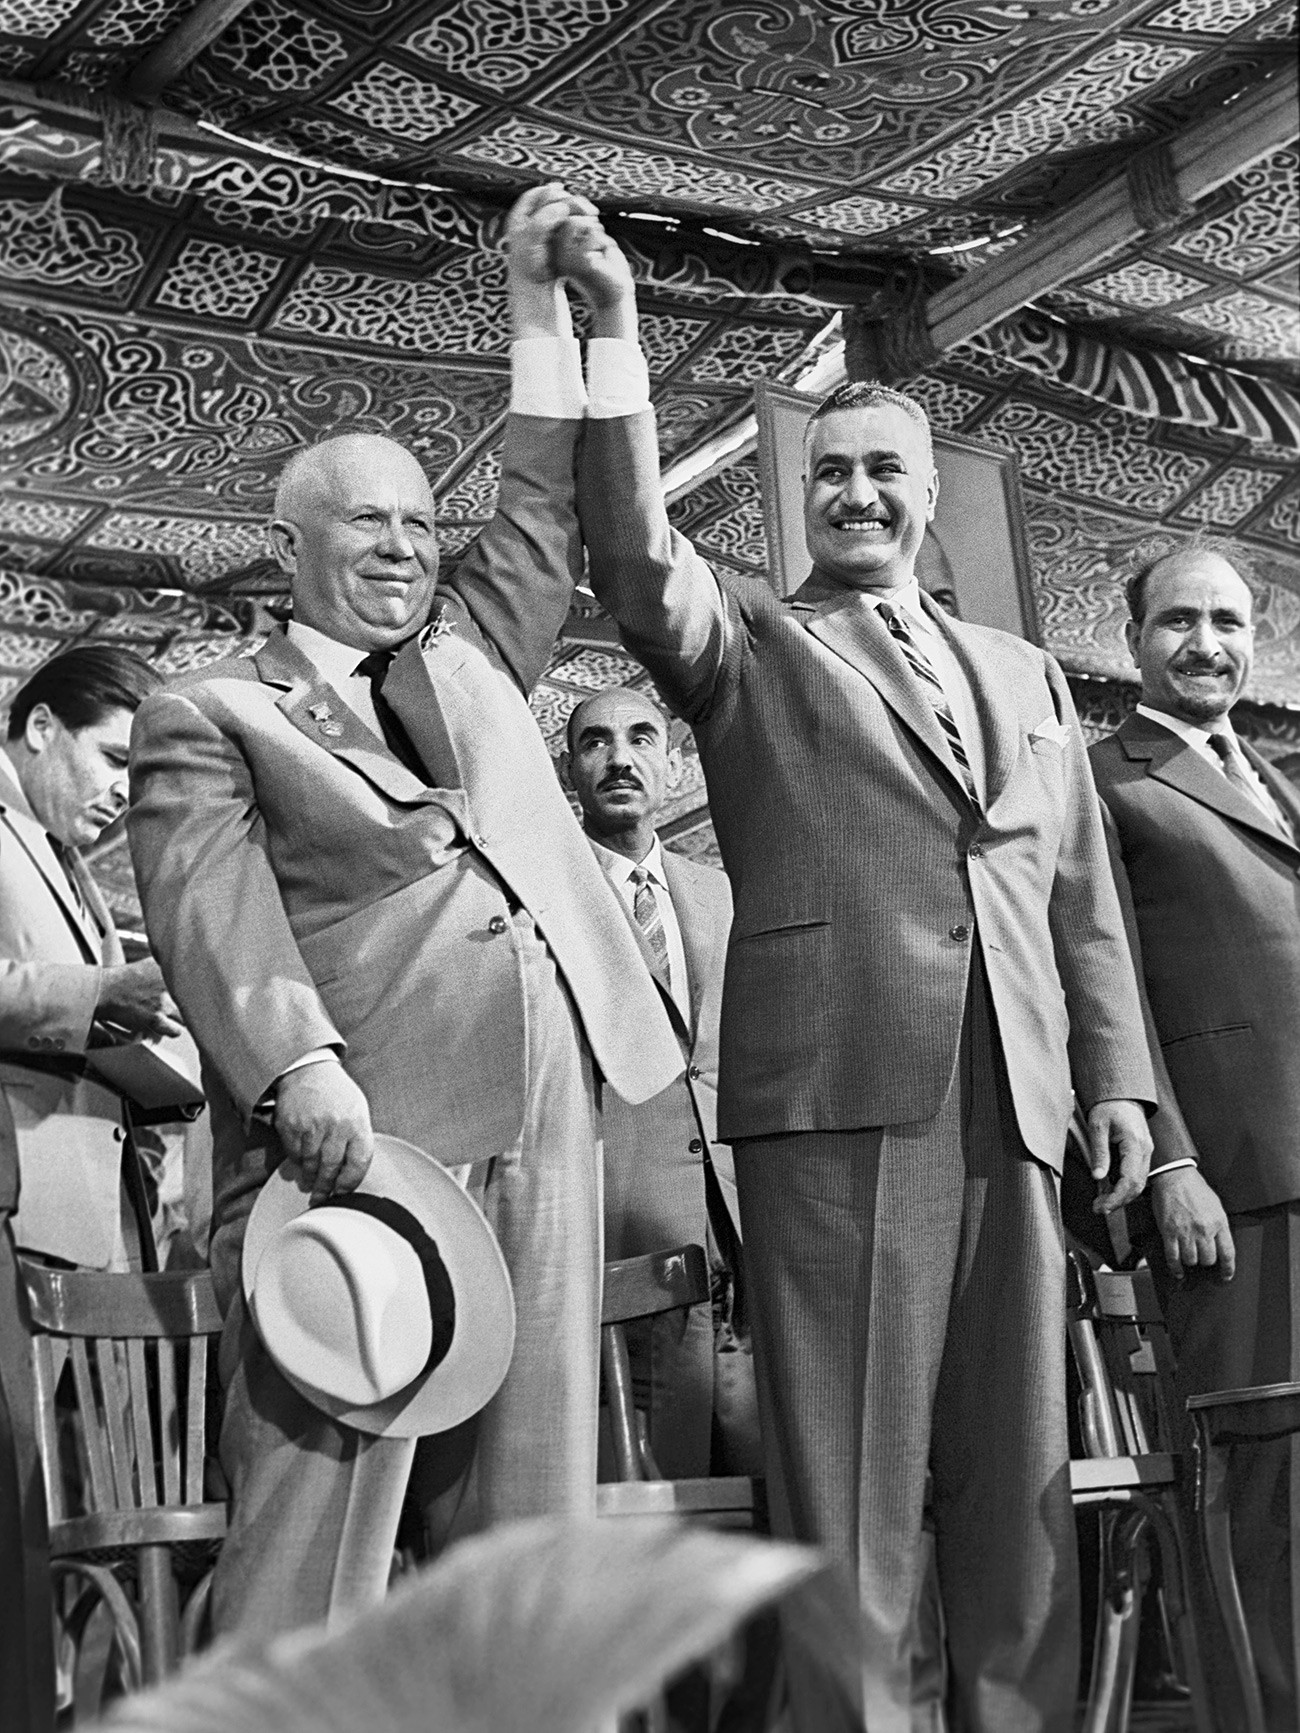 Gamal Abdel Nasser of Egypt was the first African leader to establish friendly relations with the USSR.